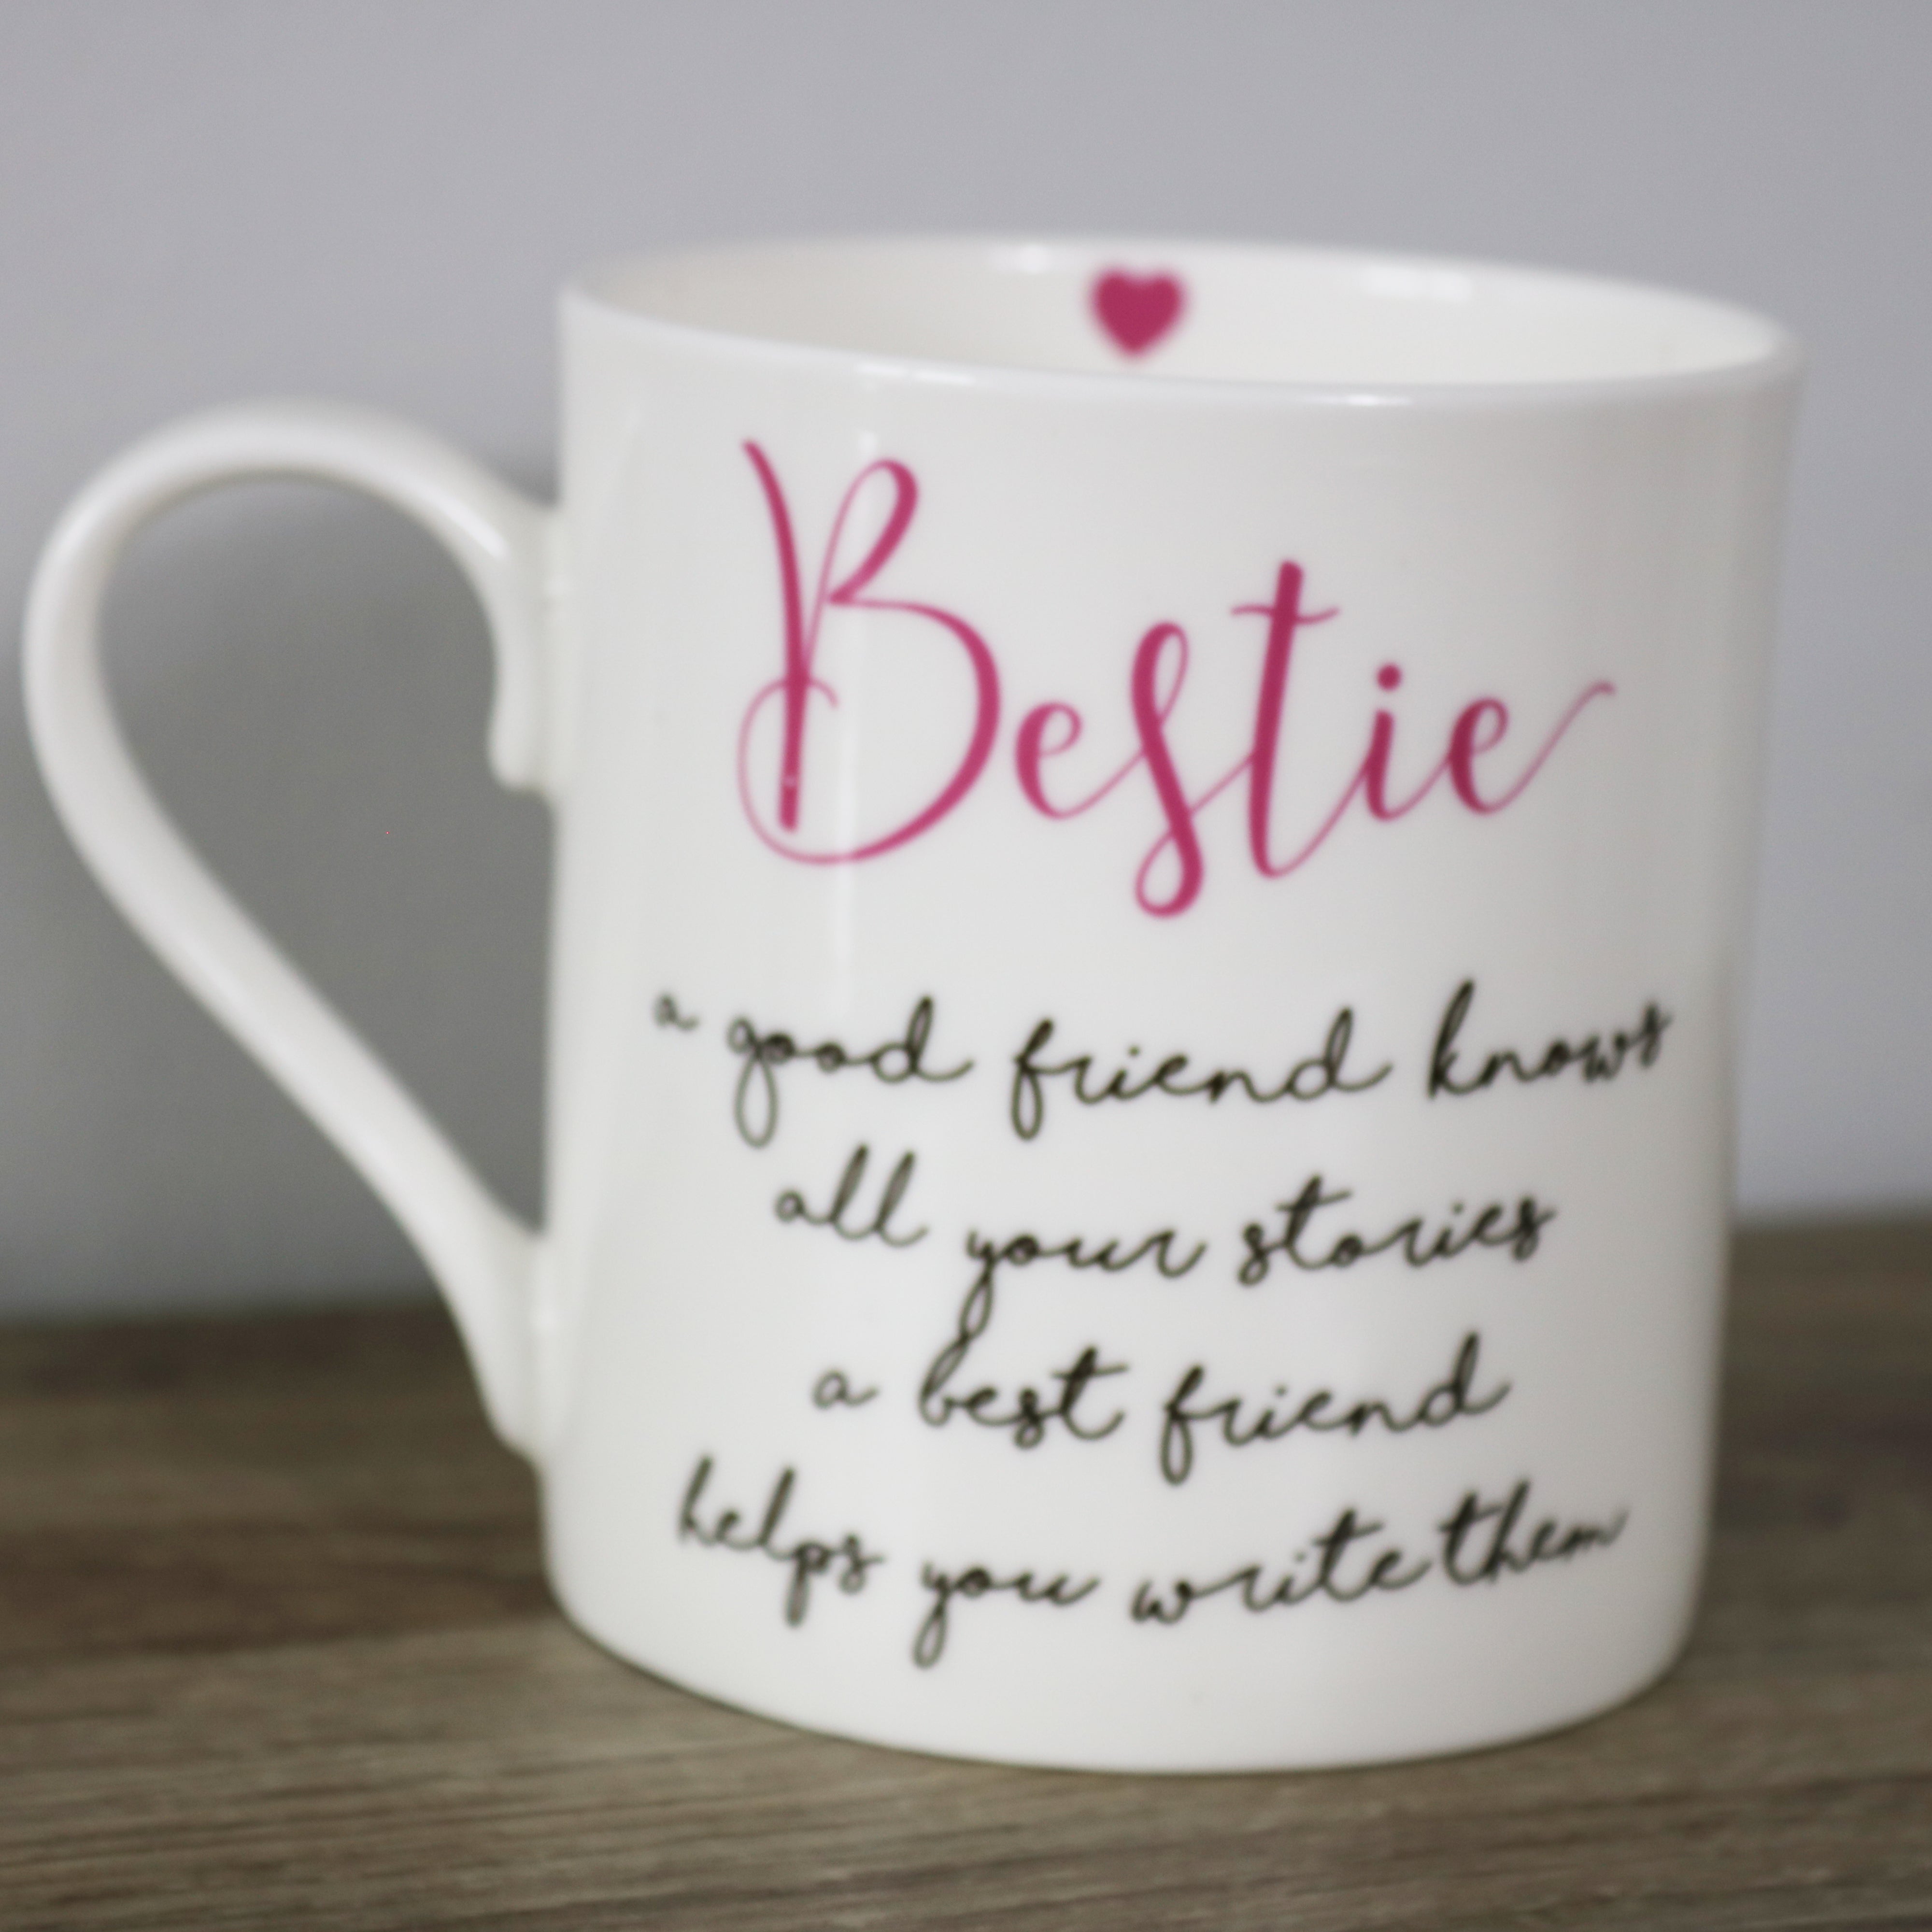 Bestie - A good friend knows your stories a best friends helps you write them